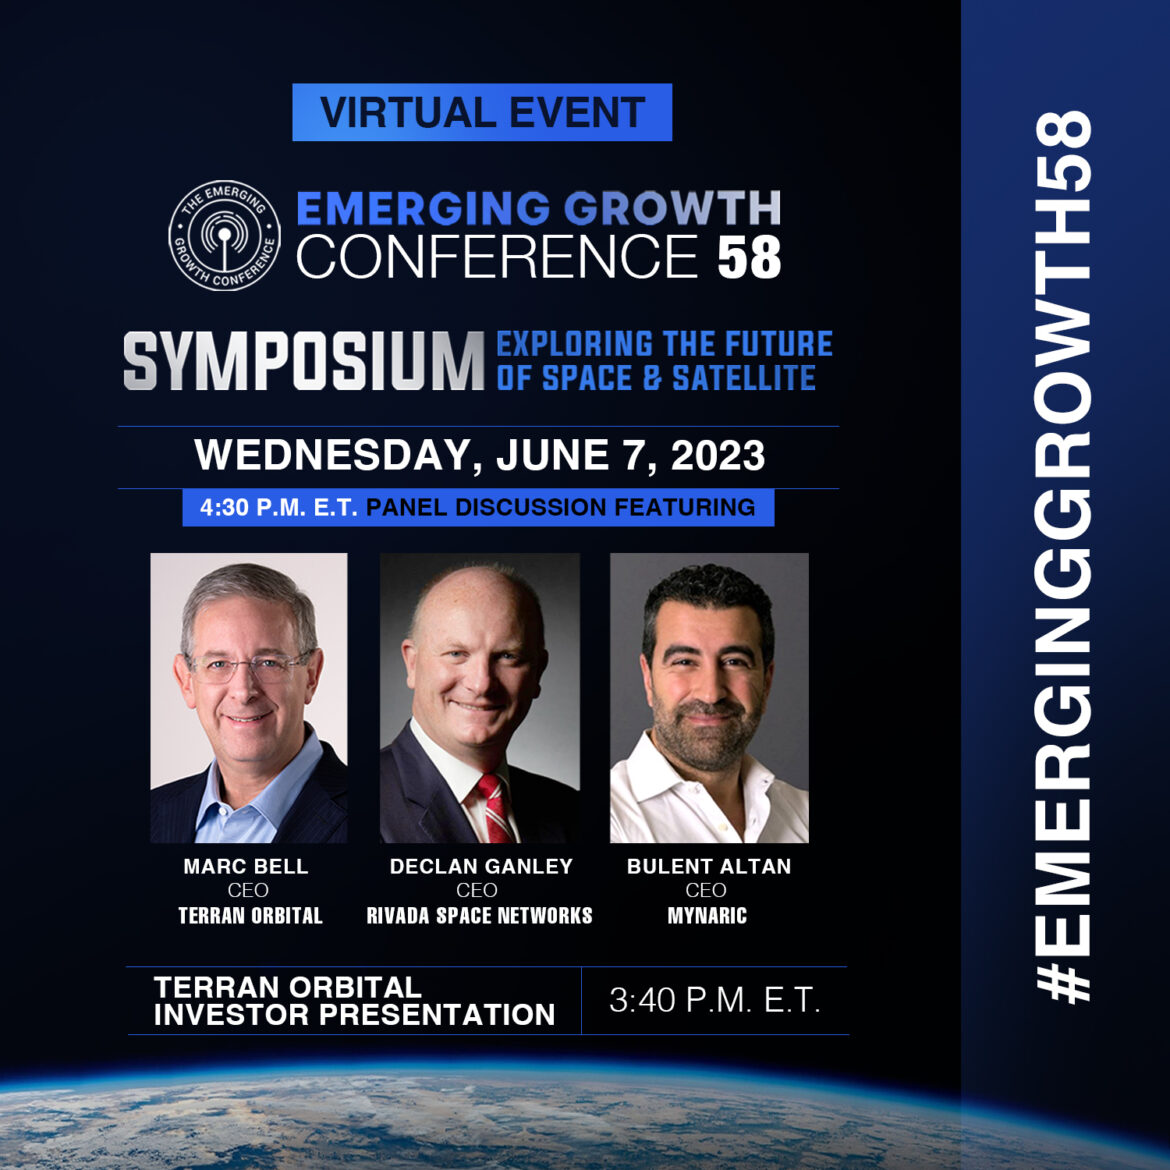 Terran Orbital to Present at Emerging Growth Conference 58 “Space Symposium” Exploring the Future of Space & Satellite